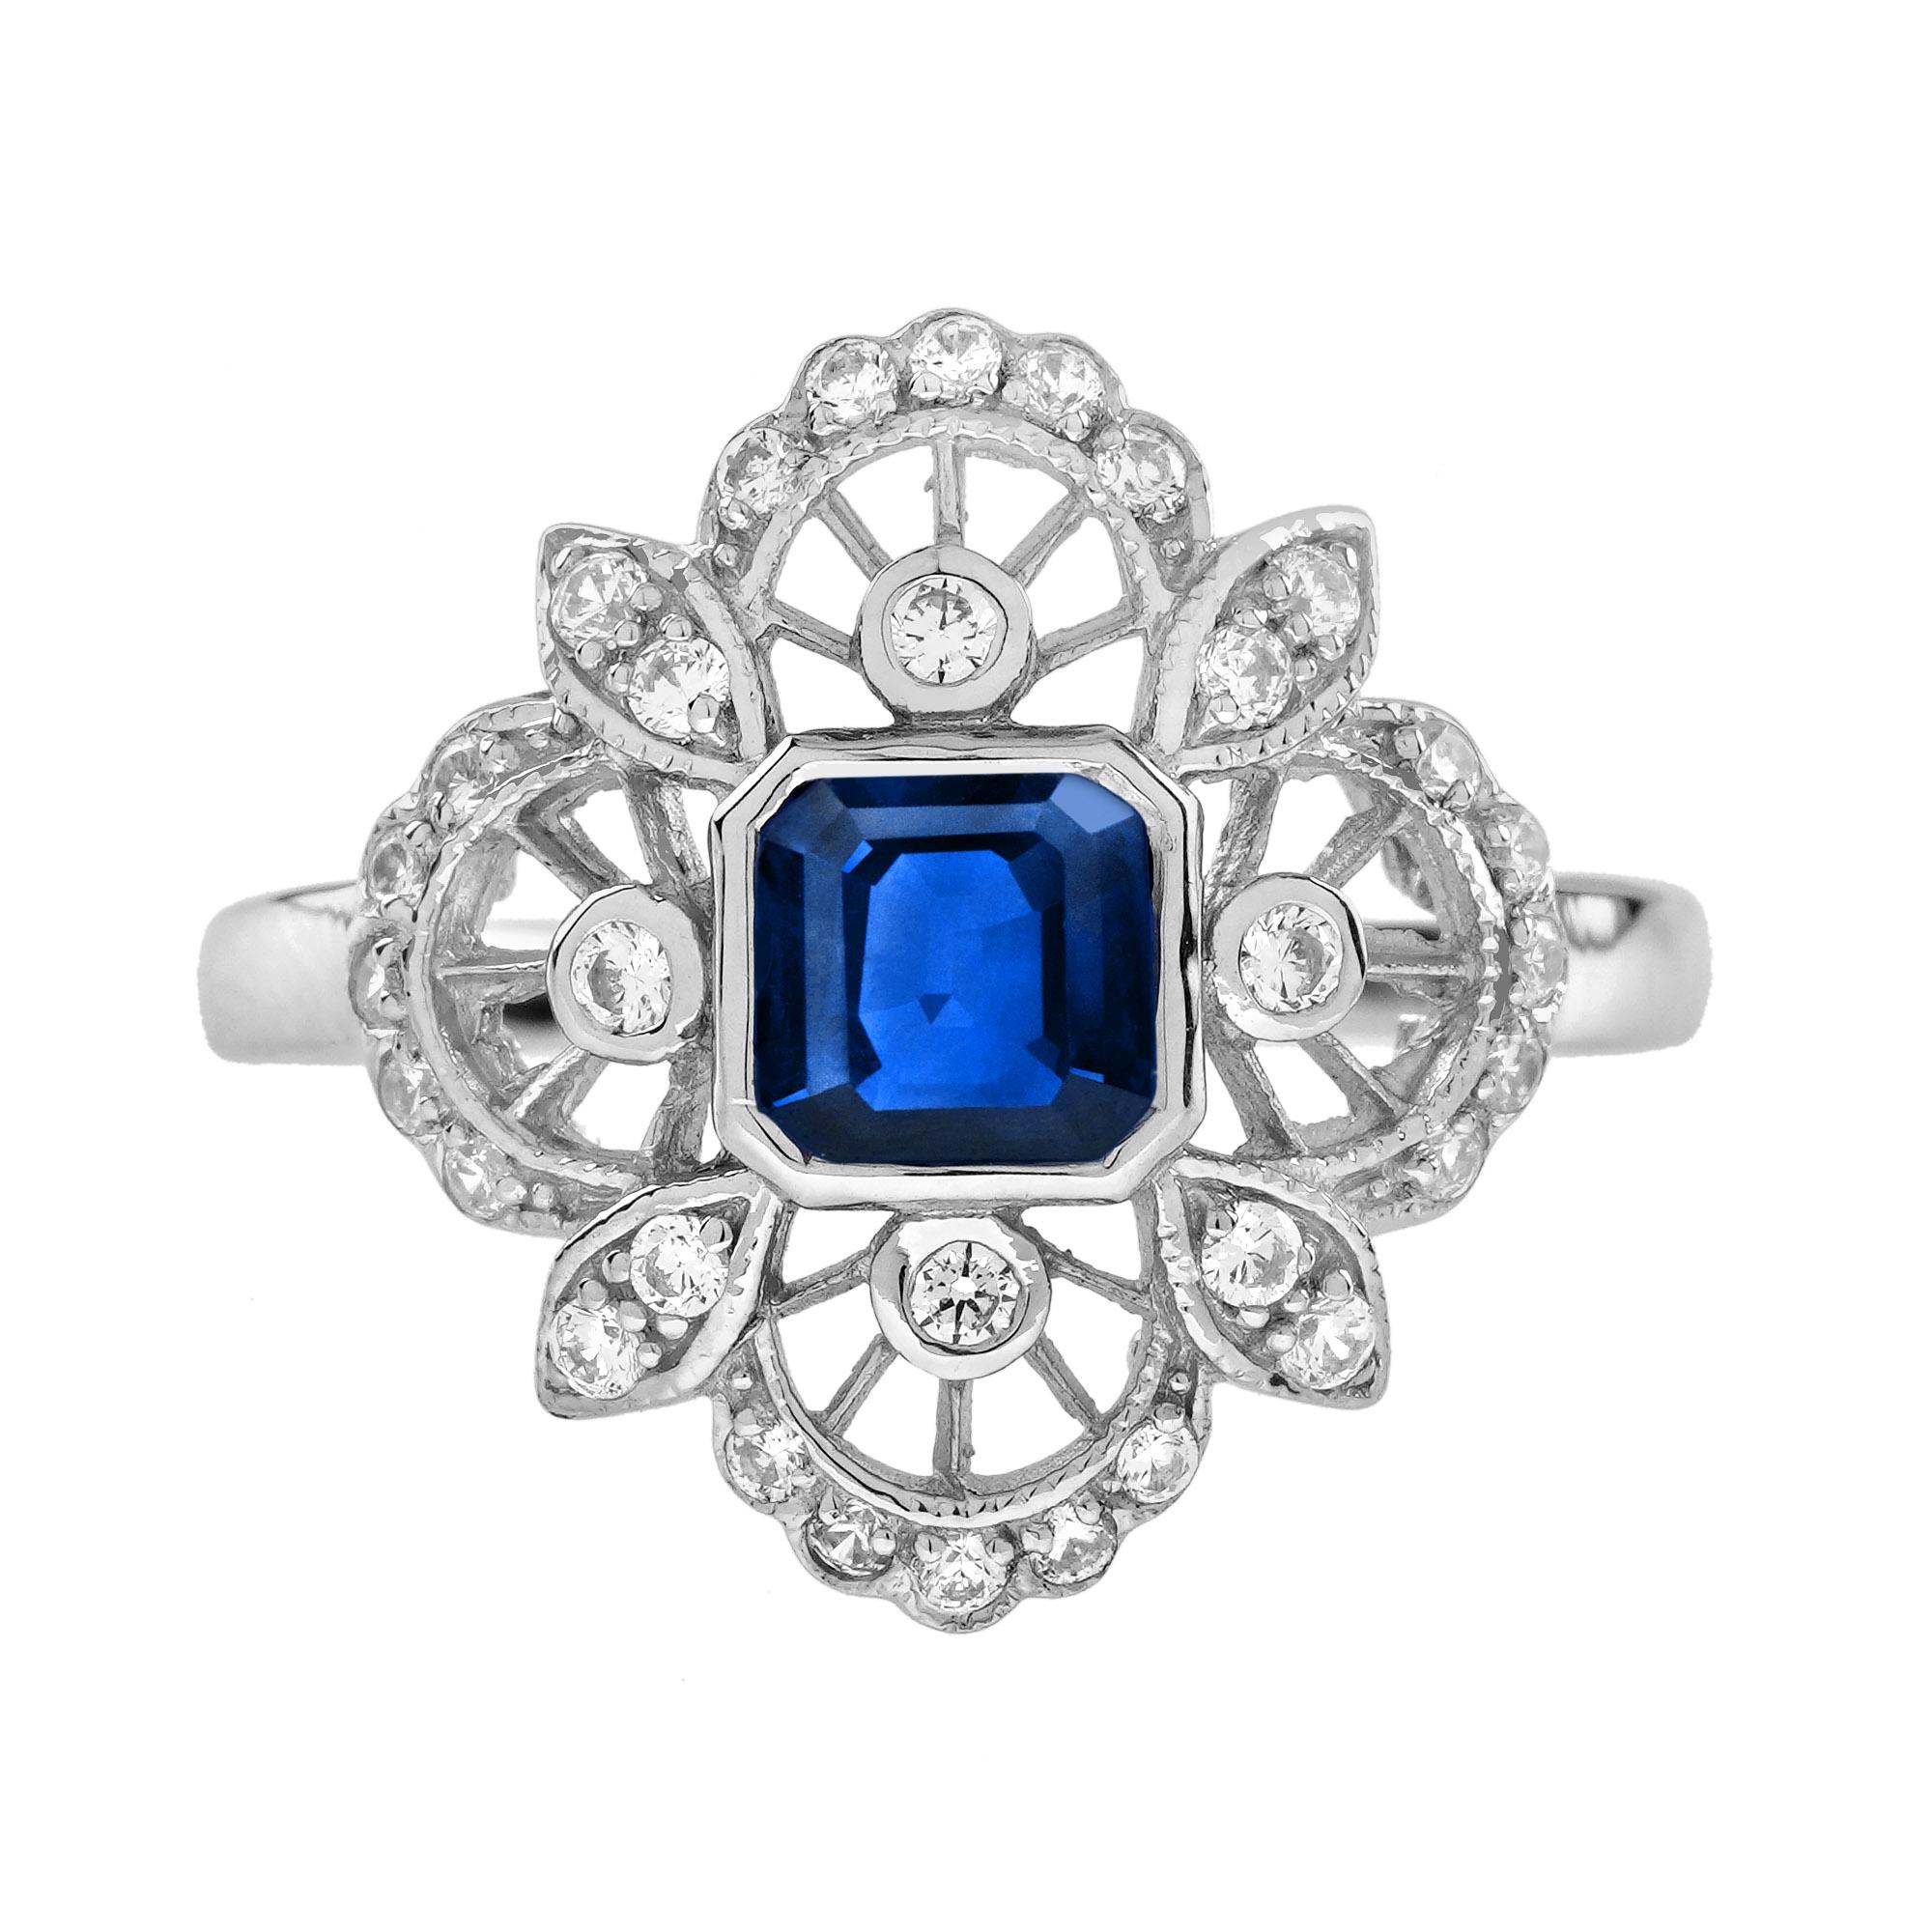 Blue Sapphire and Diamond Antique Style Engagement Ring in 14K White Gold